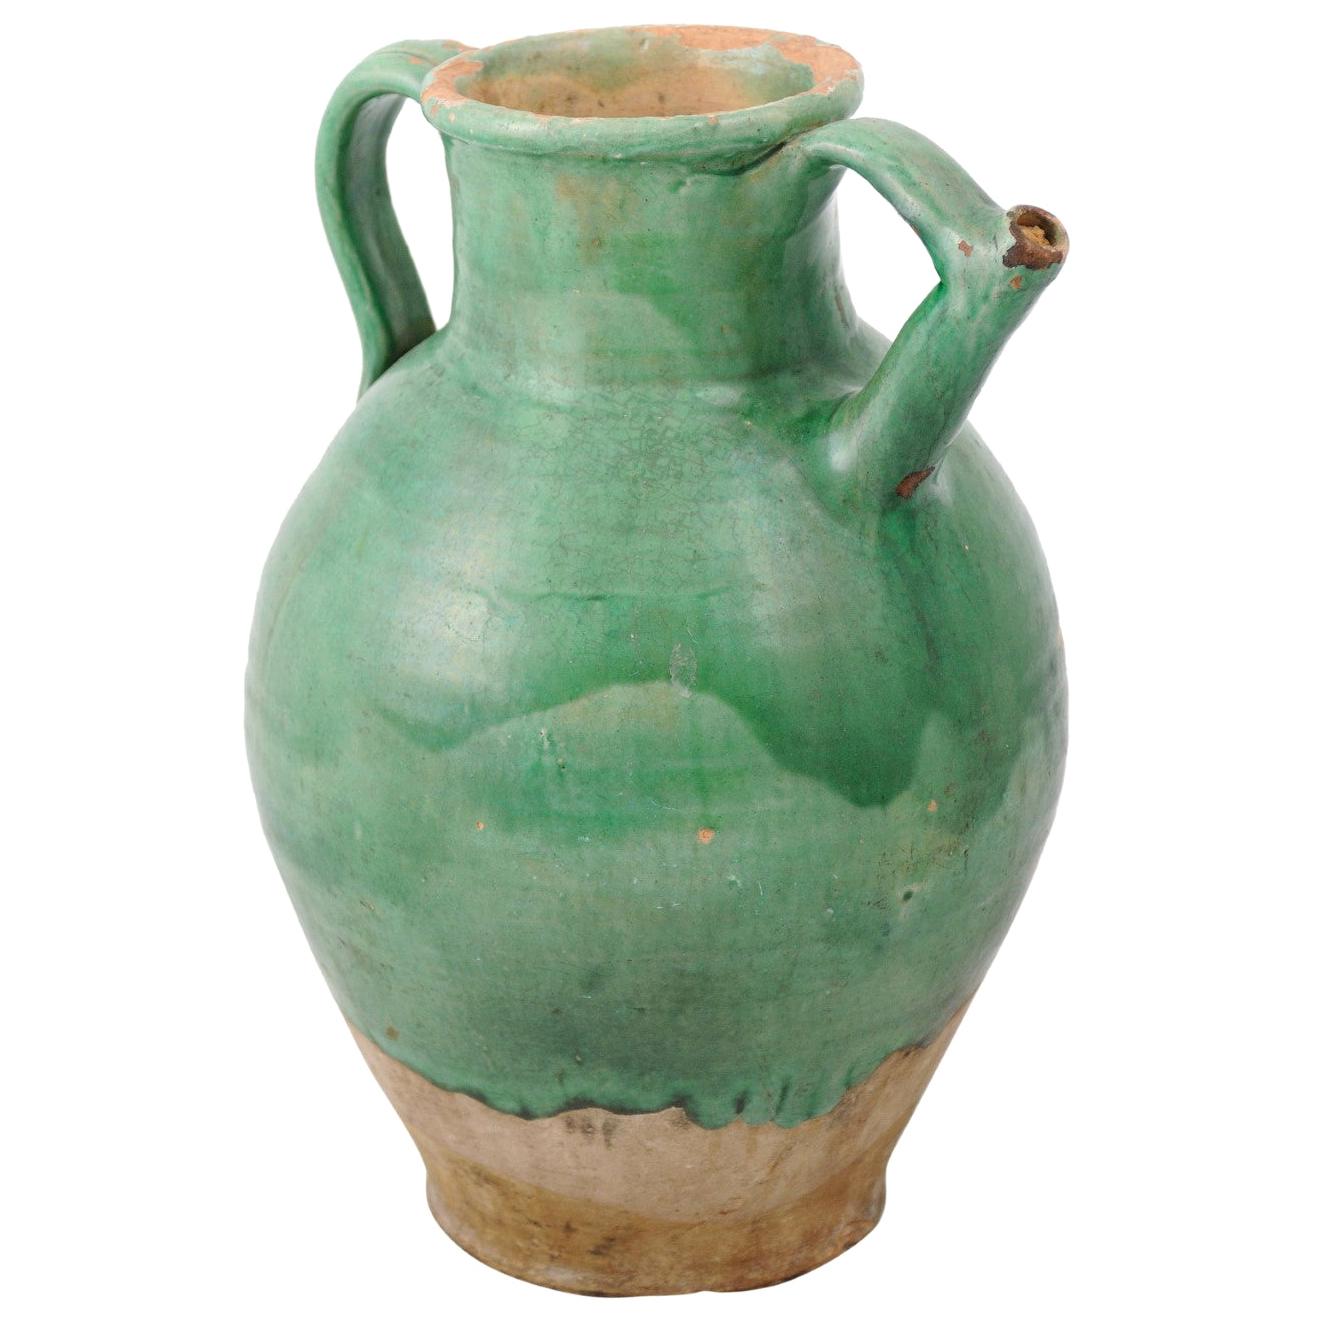 French Provincial 19th Century Distressed Green Glazed Pottery Jug with Spout